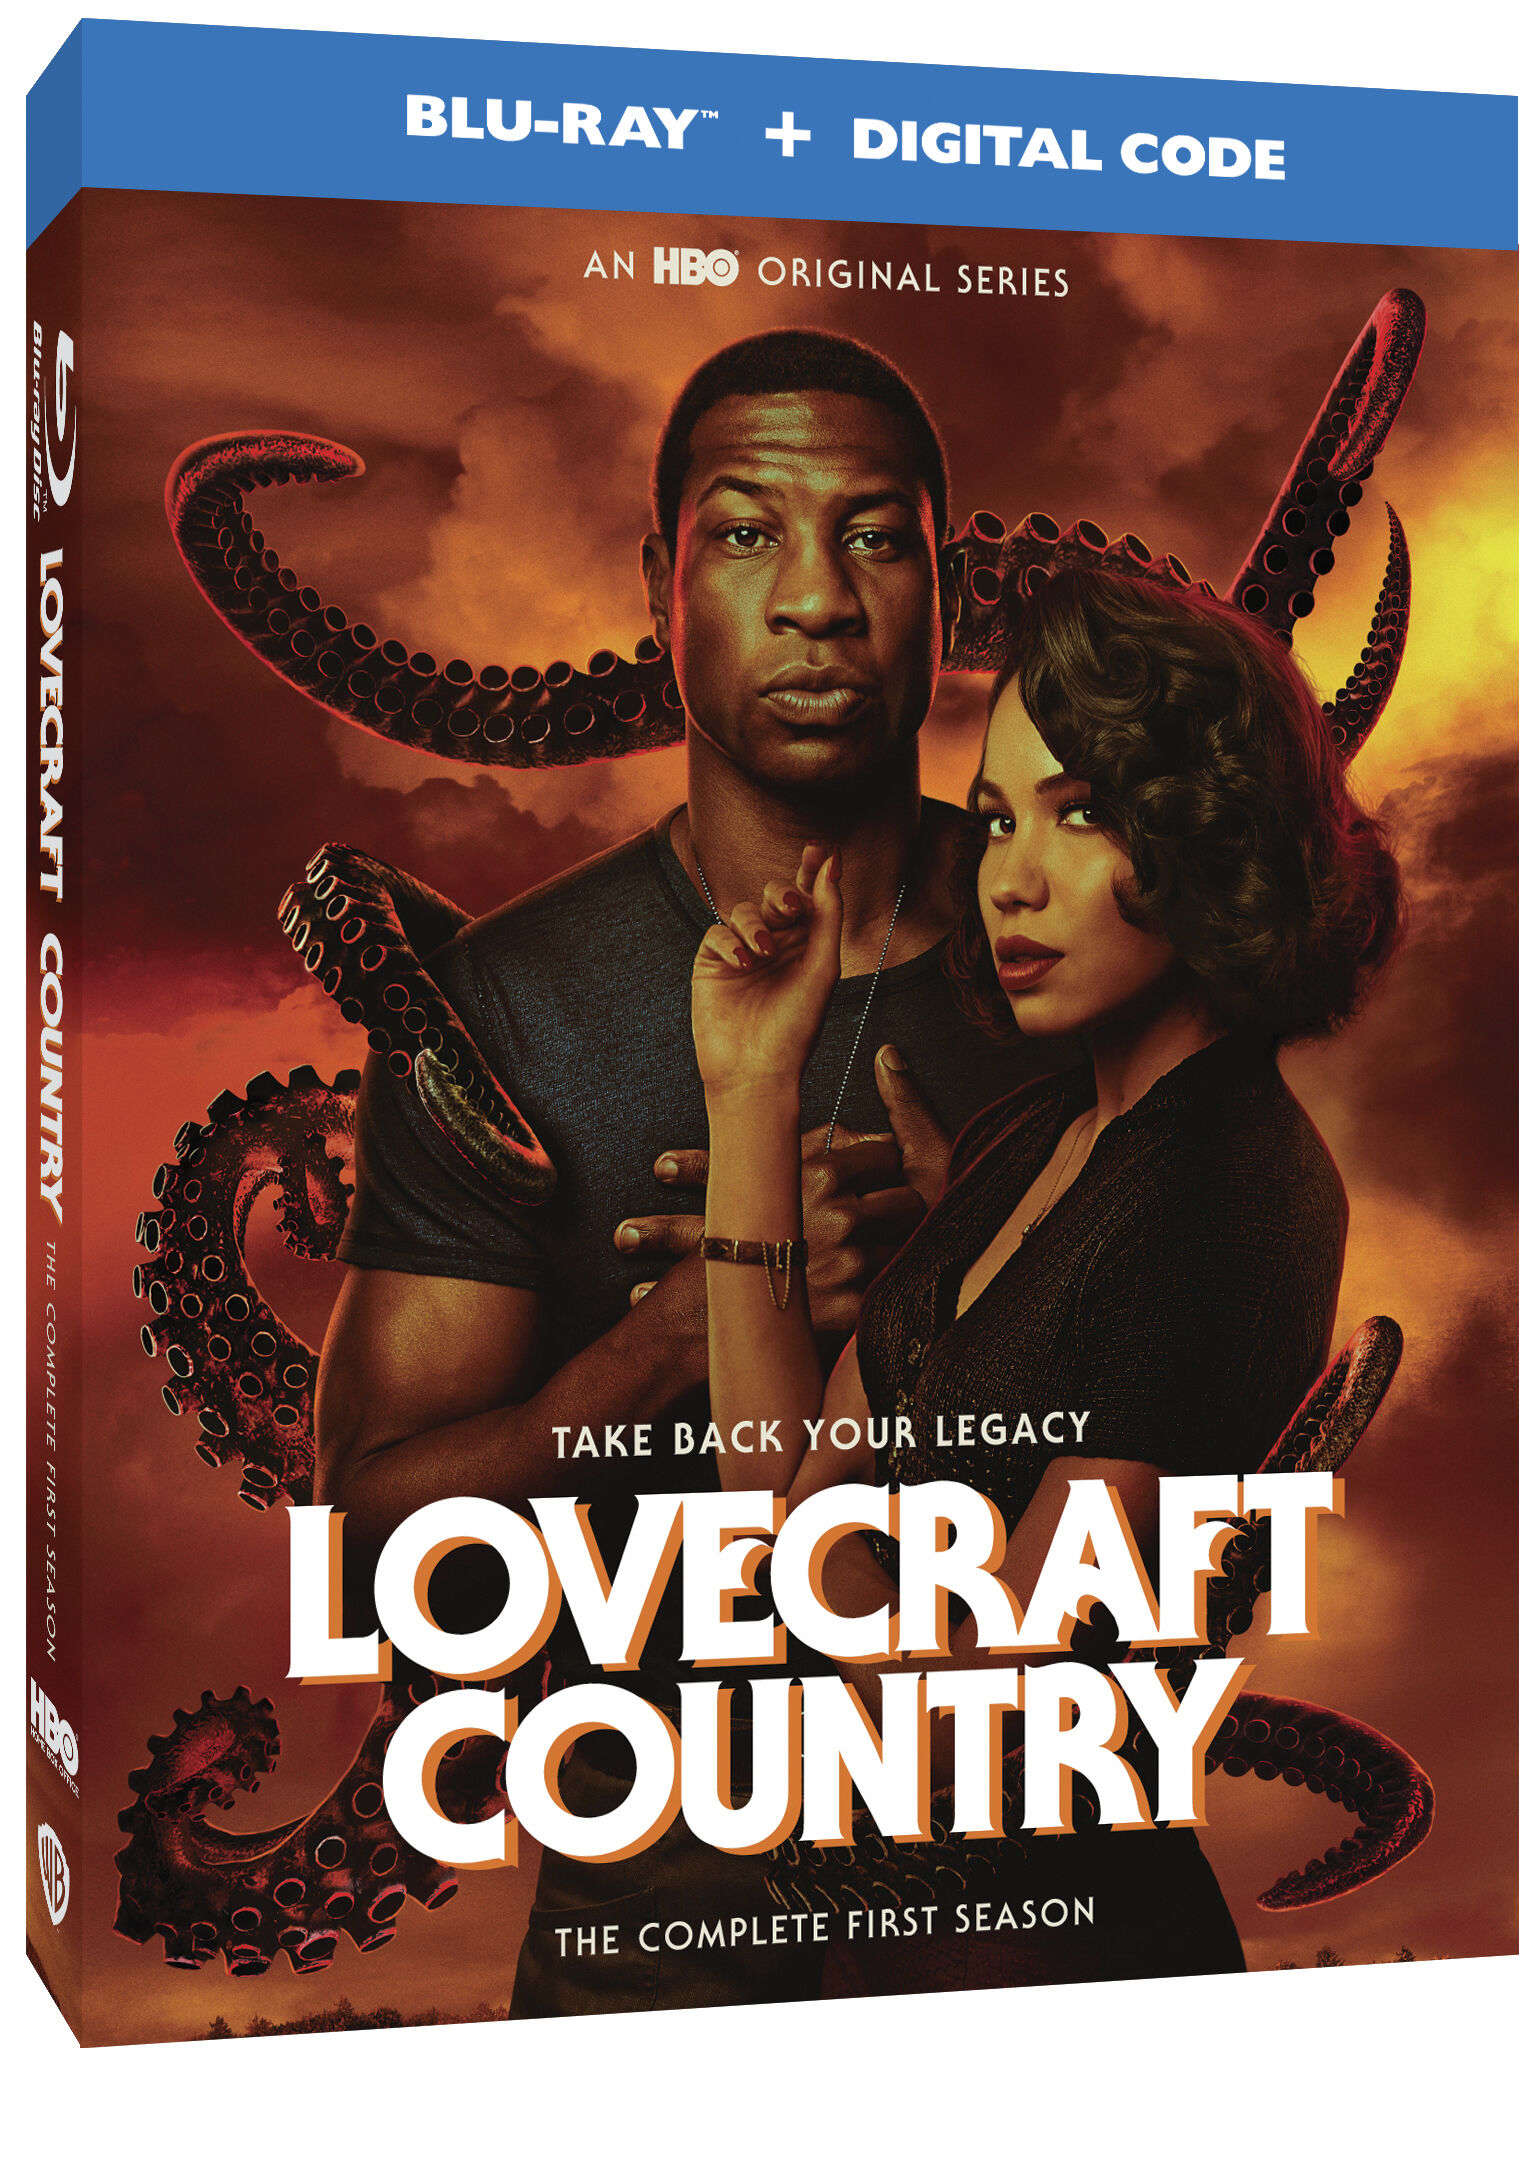 Lovecraft Country Season 1 home release box art